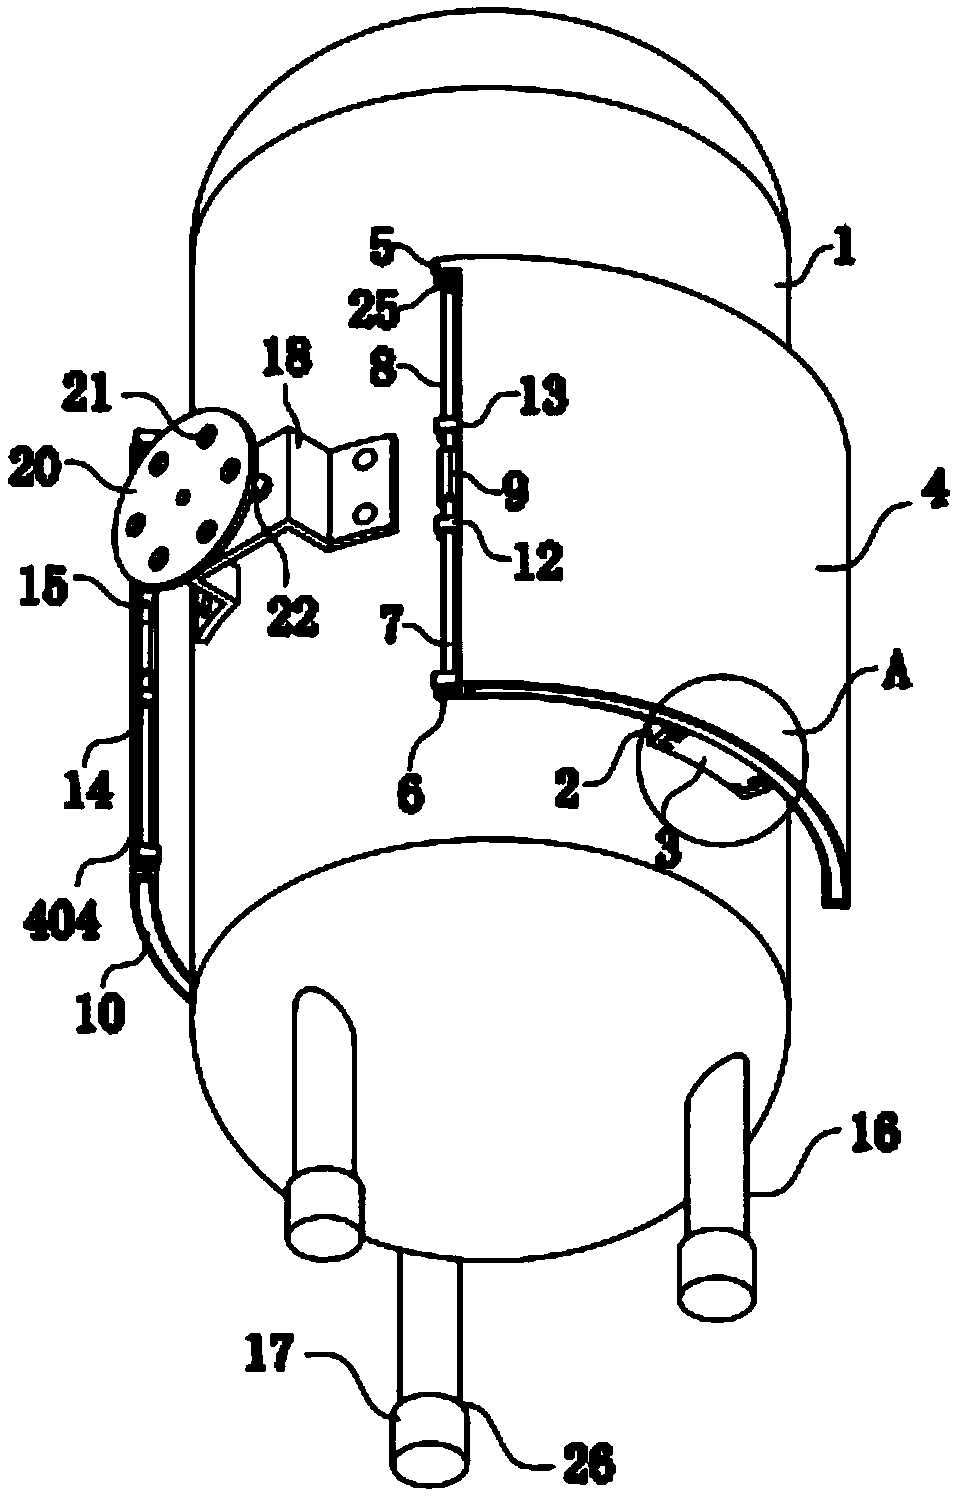 Boiler with isolation mechanism